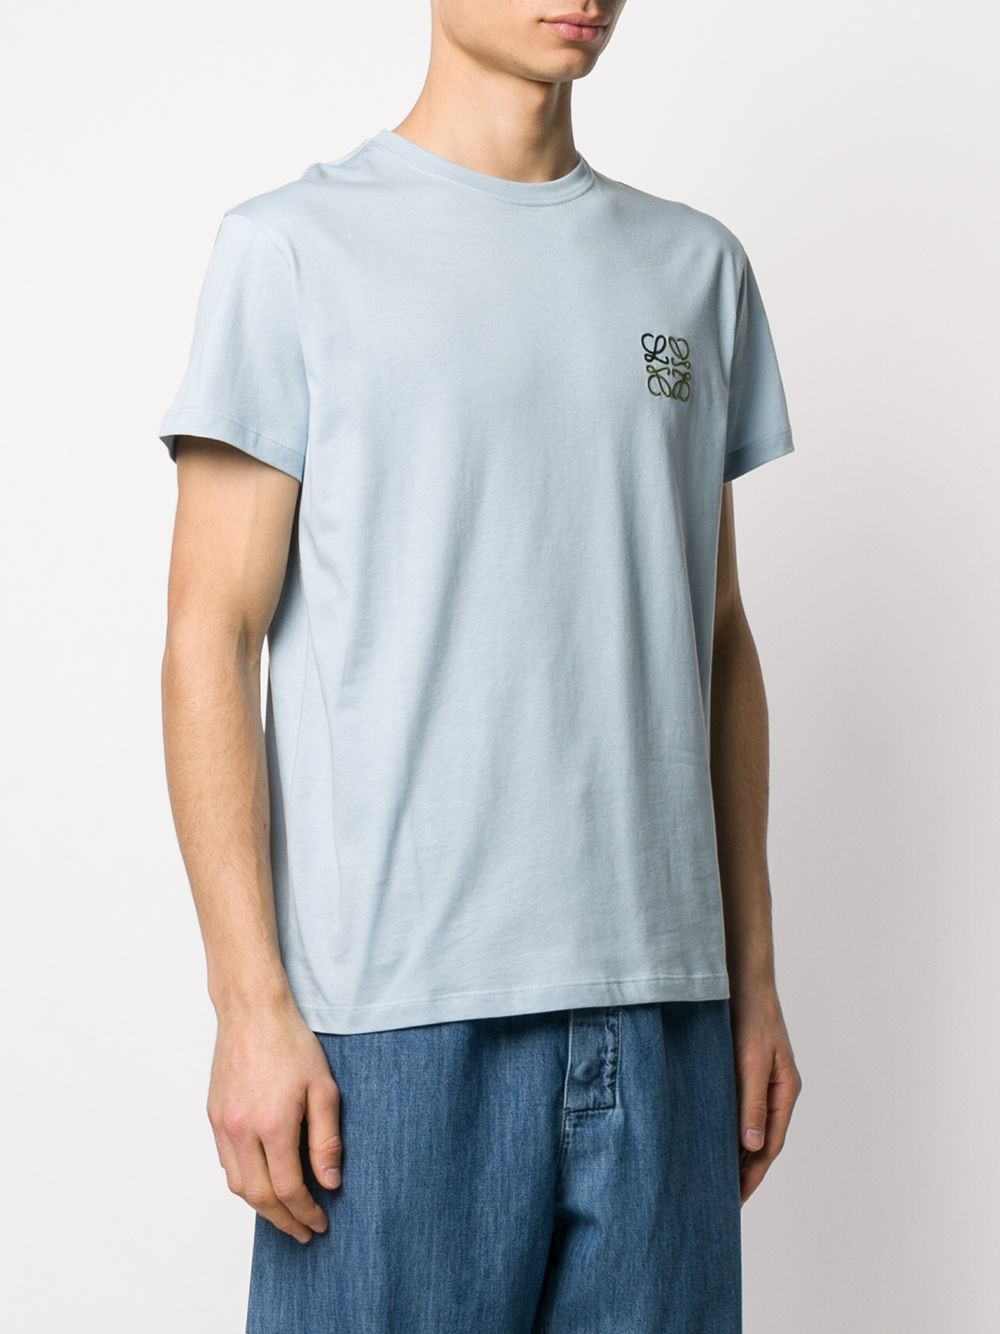 loewe ANAGRAM T-SHIRT available on montiboutique.com - 32439